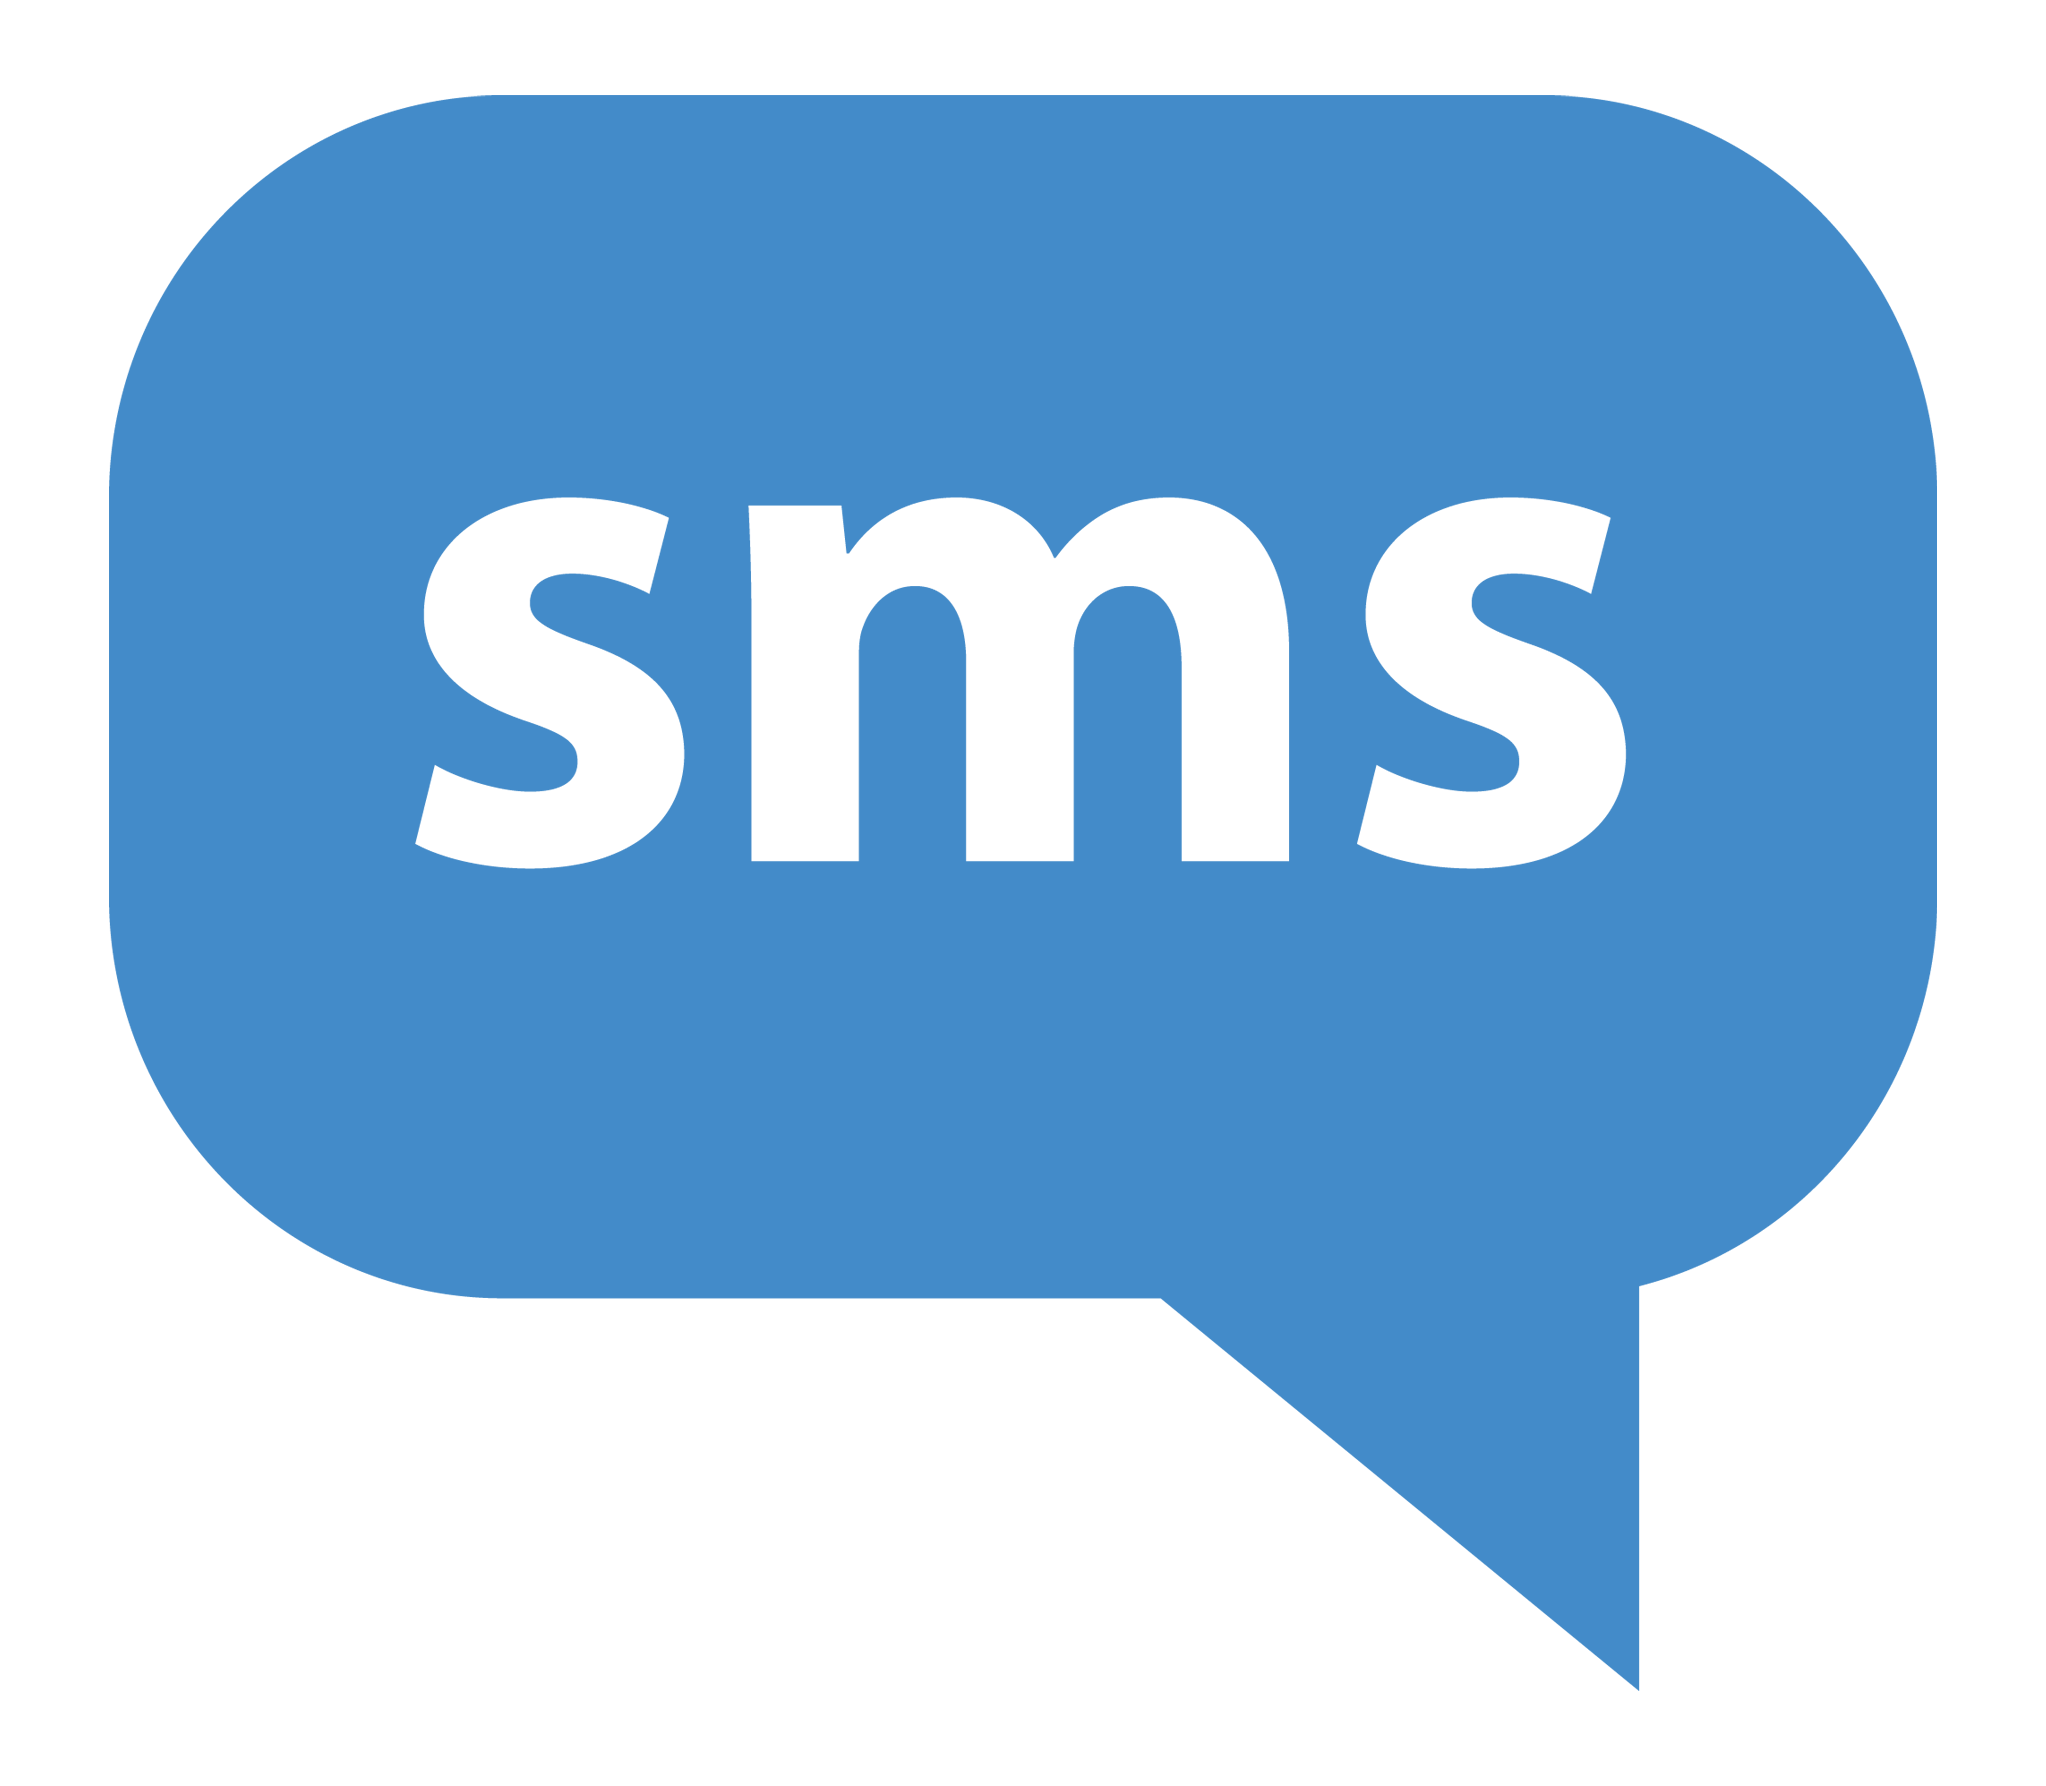 The program notifies the customer with an SMS message when the customer’s request conforms to the specifications of a particular property whose content is (we would like to inform you that there is a number: (the number) a property for sale is available - your request is listed with us)